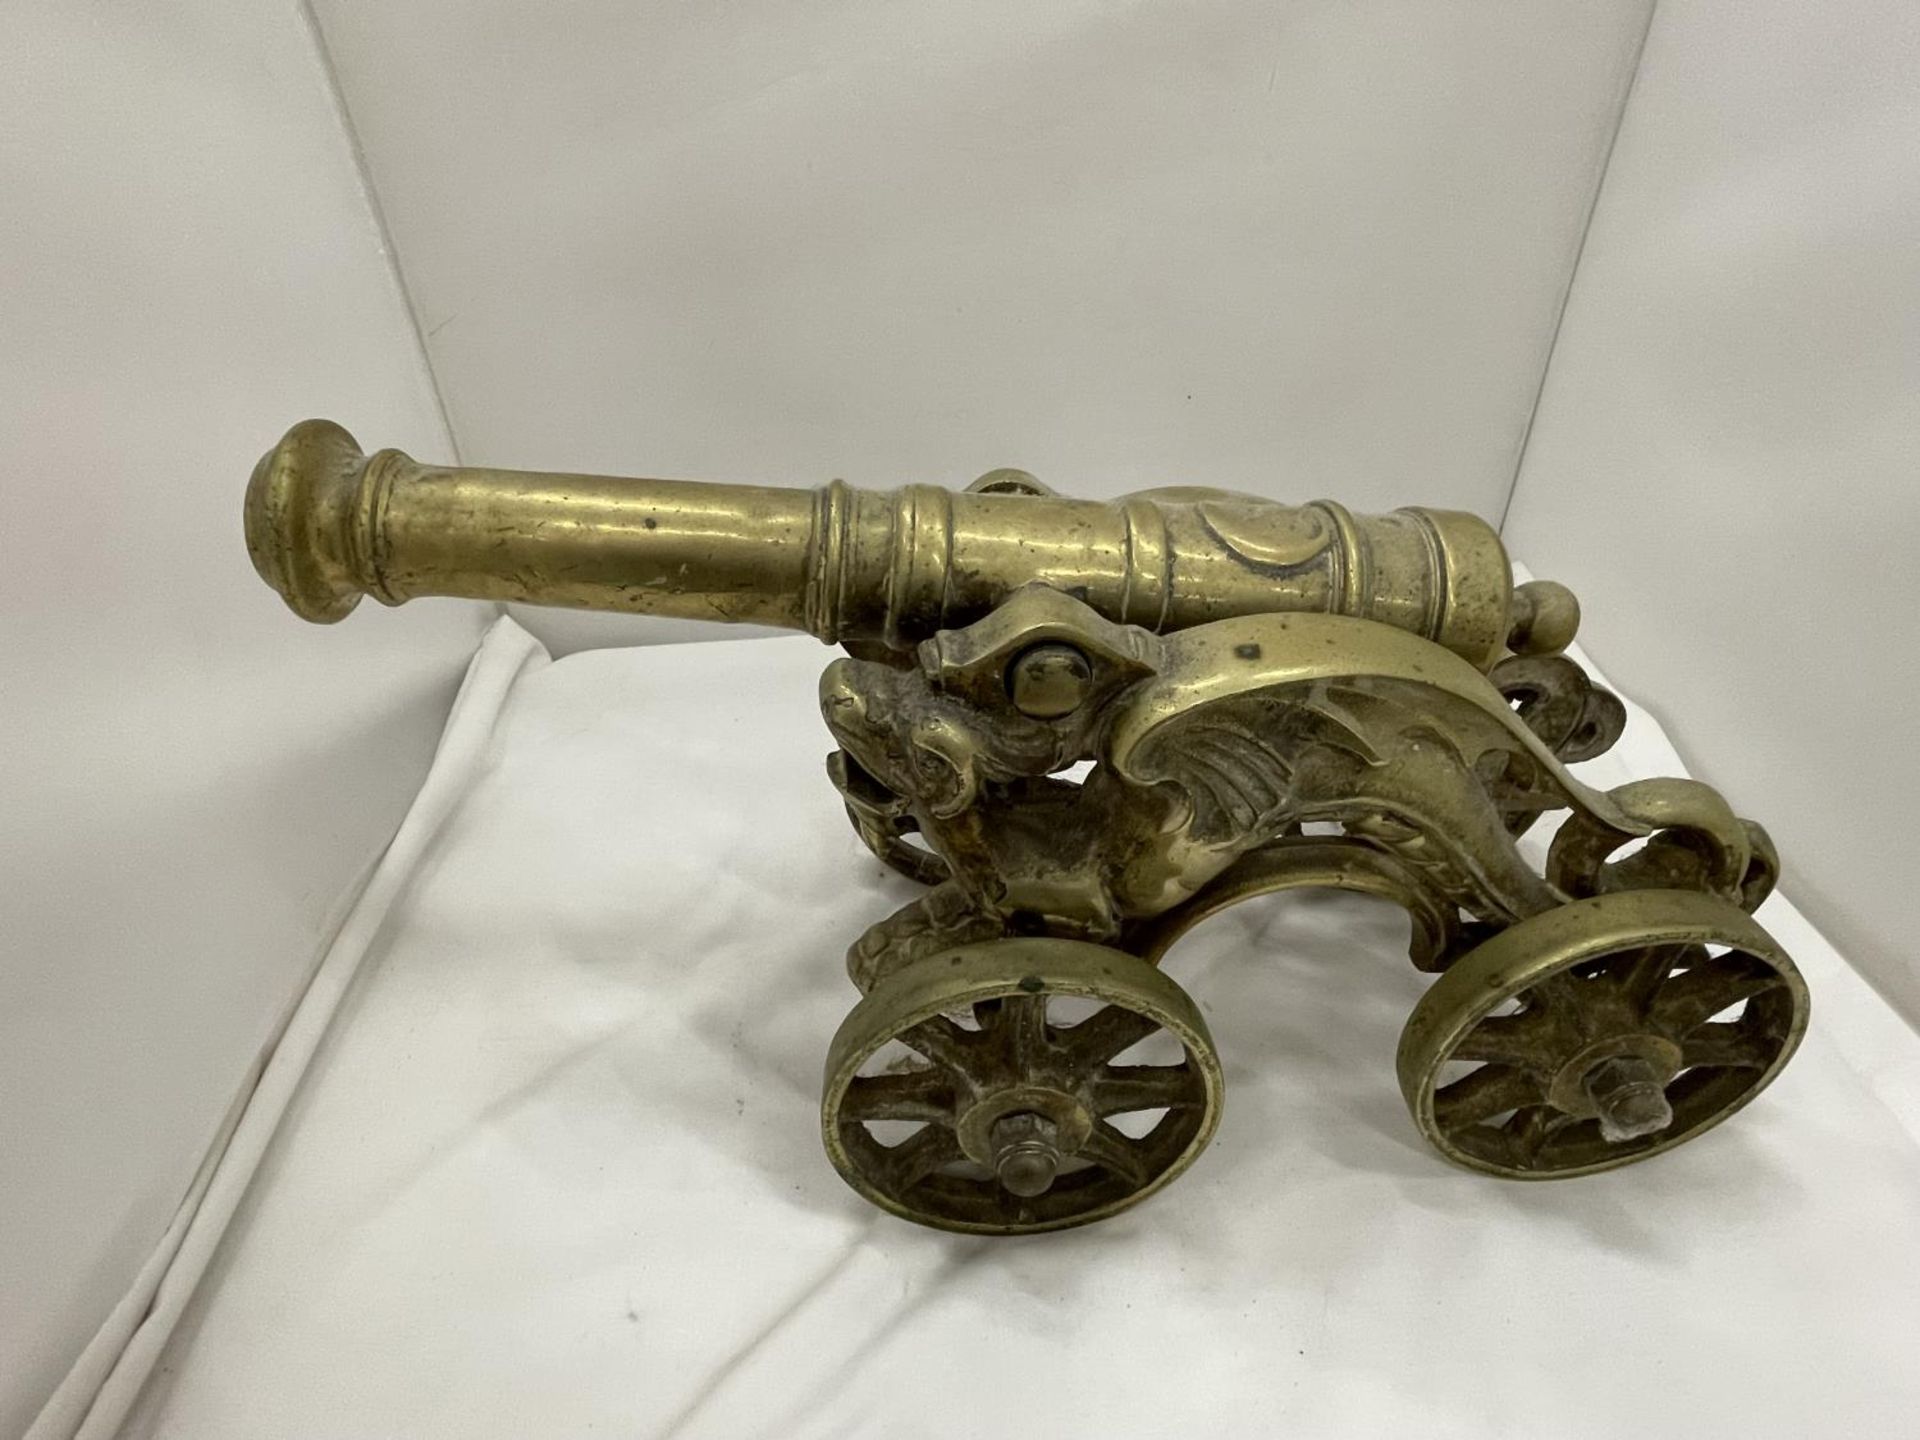 A VERY LARGE HEAVY BRASS CANNON